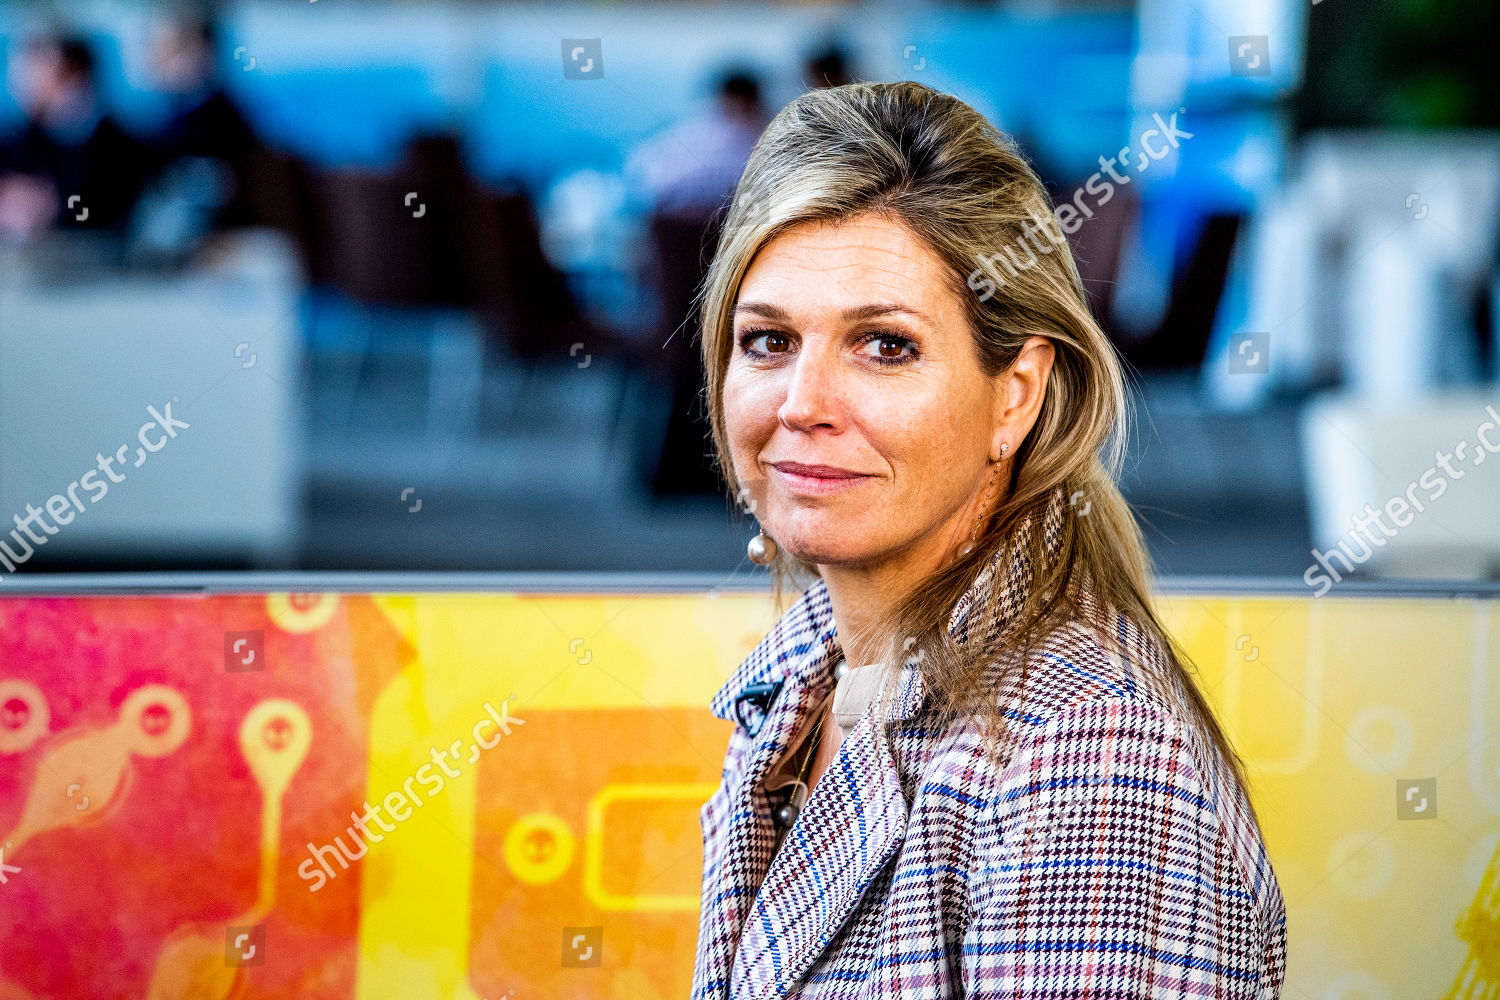 queen-maxima-in-her-role-as-special-advocate-of-the-un-secretary-general-for-inclusive-financing-for-development-during-a-facebook-live-interview-washington-usa-shutterstock-editorial-9639166n.jpg